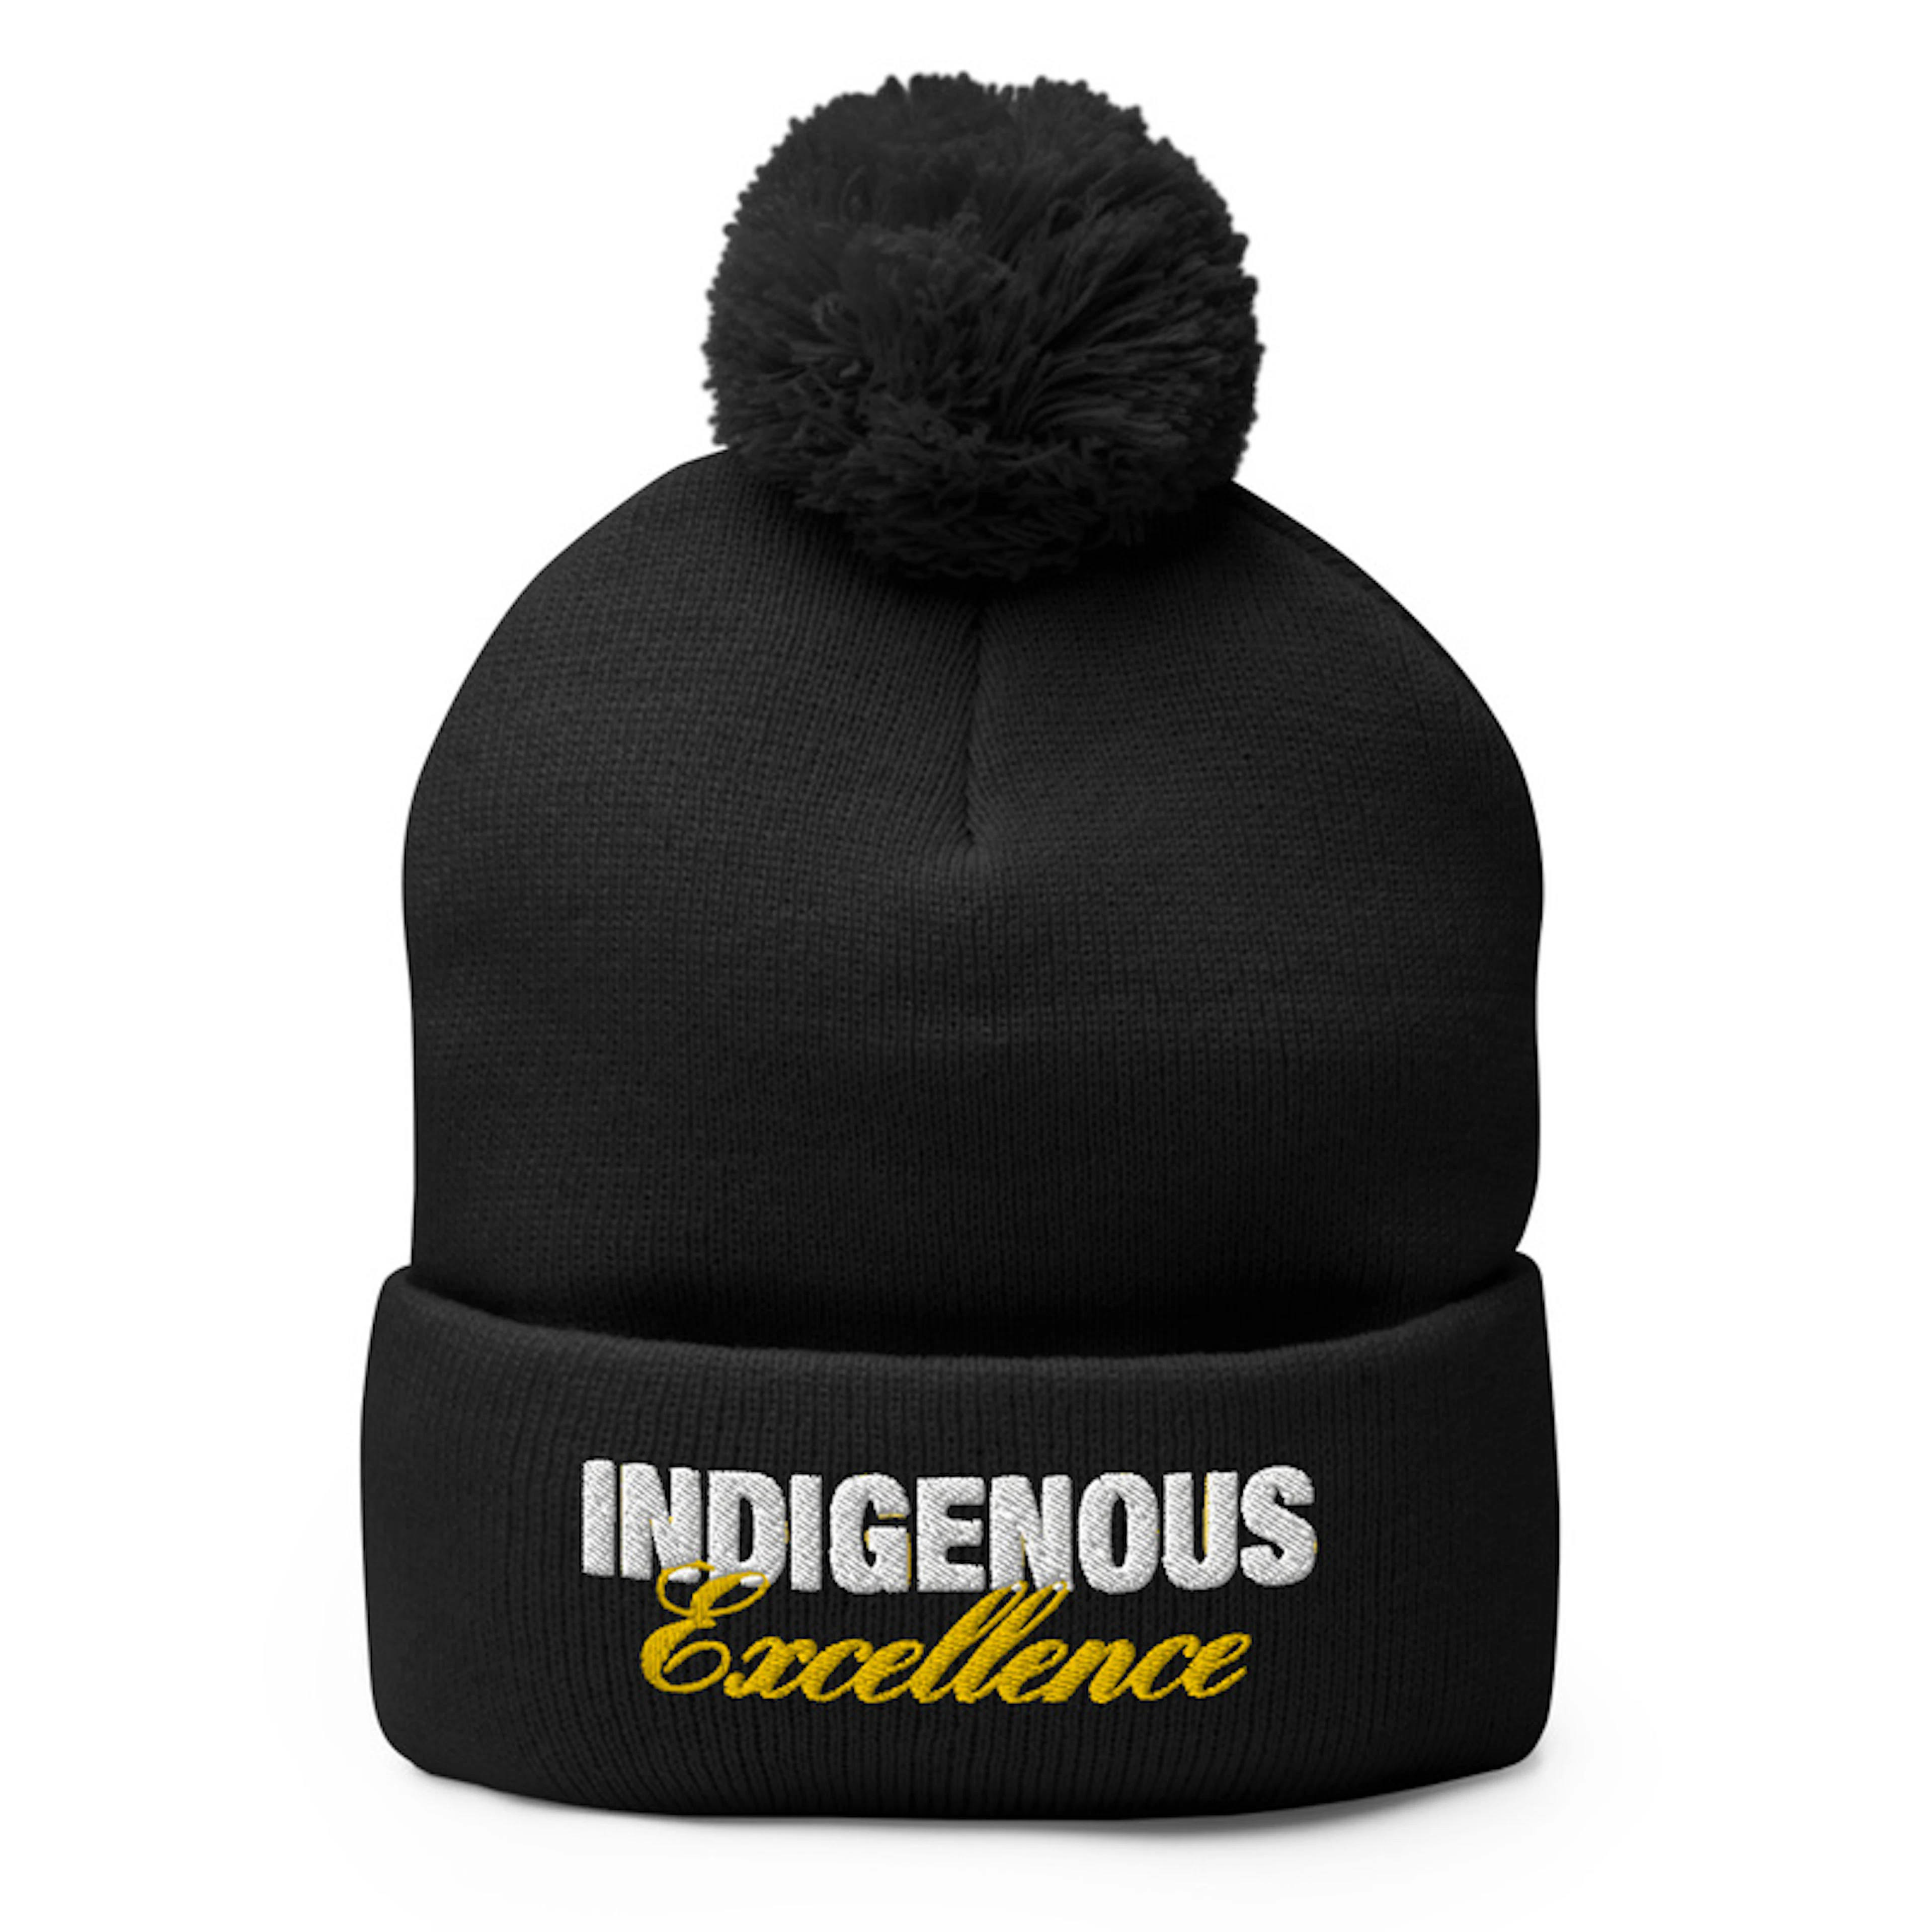 INDIGENOUS EXCELLENCE Beanie 